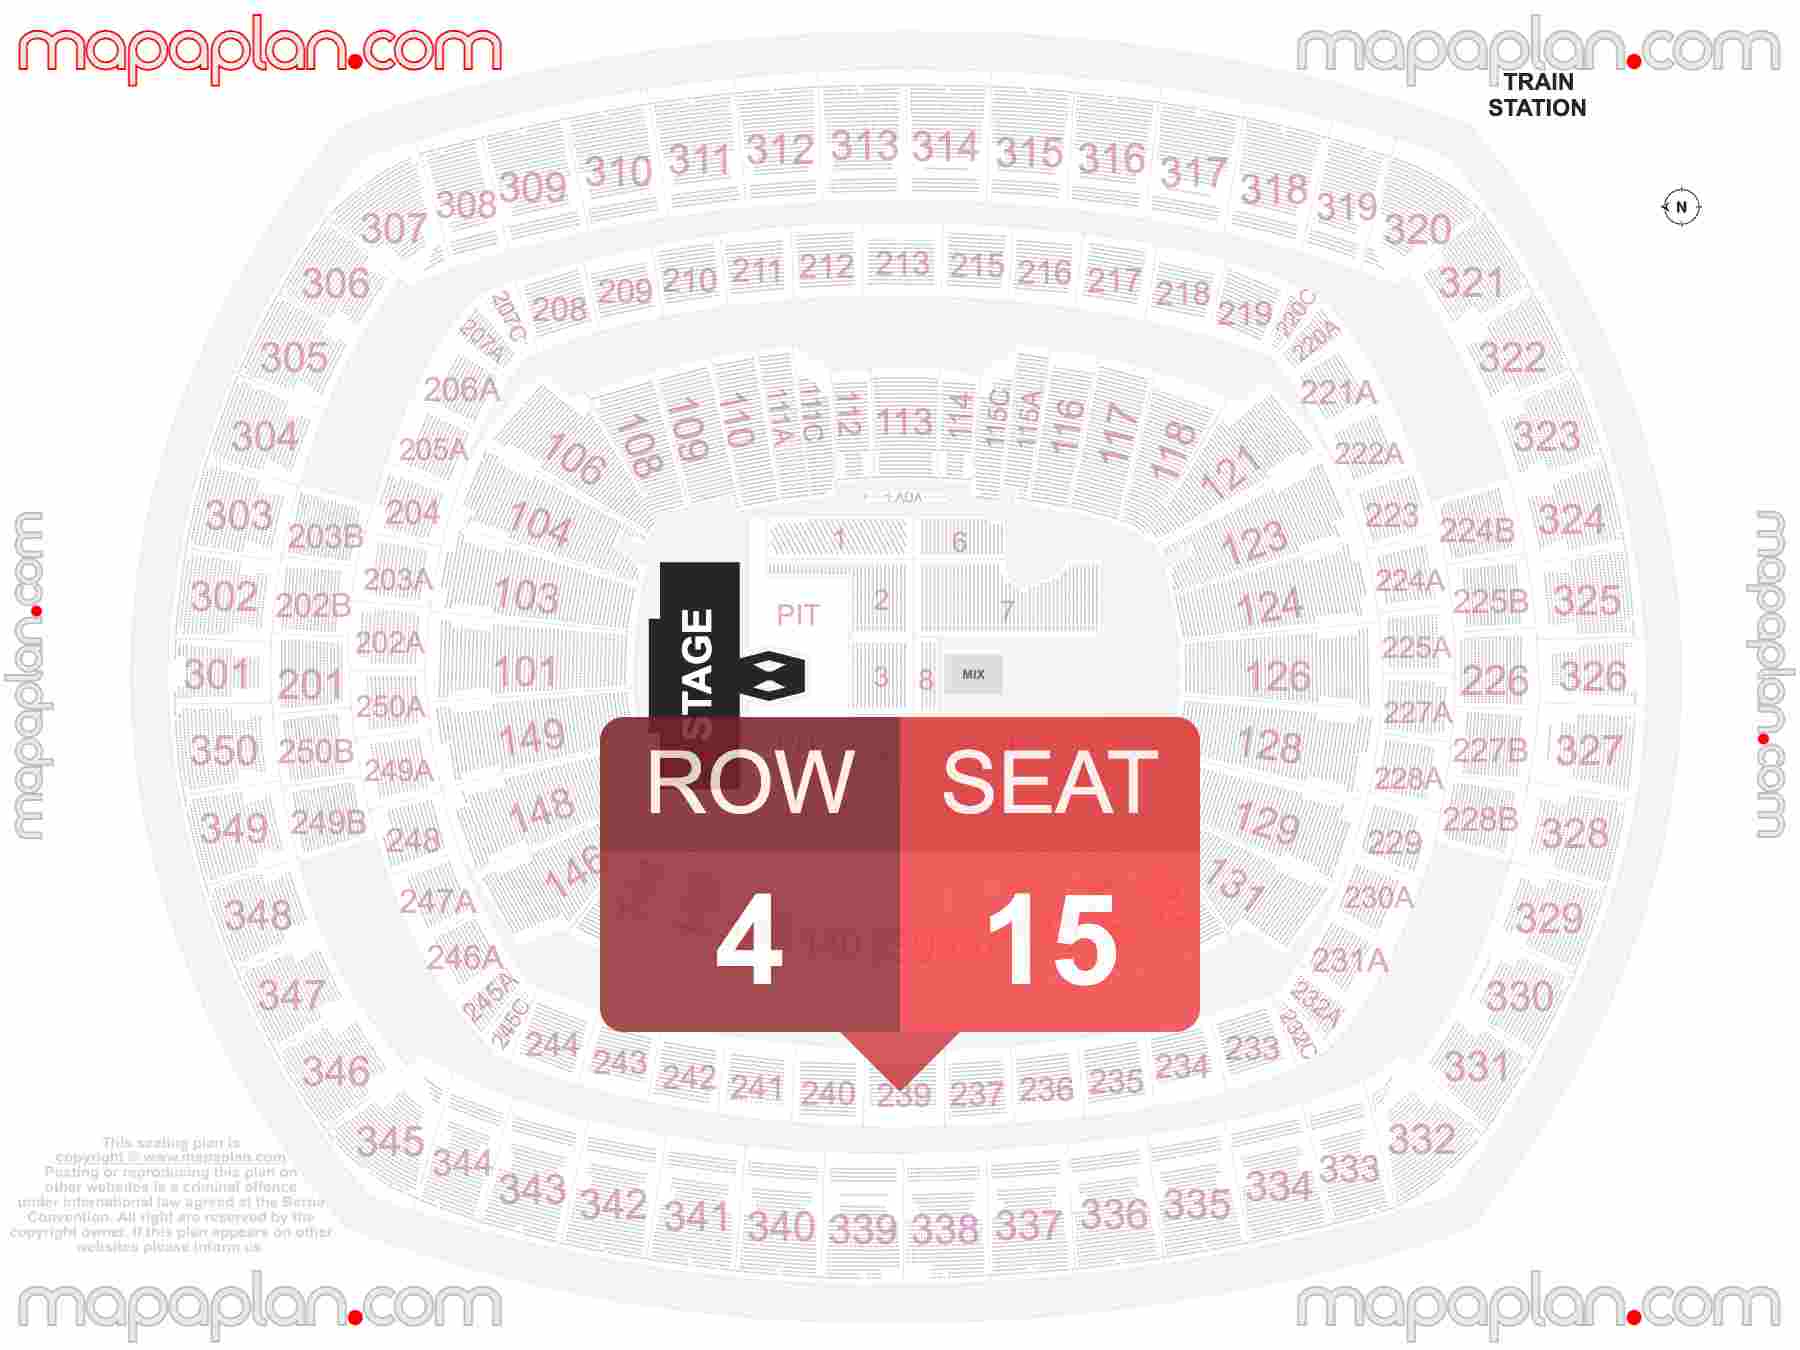 East Rutherford MetLife Stadium seating chart Concert with general admission PIT floor standing interactive seating checker map plan showing seat numbers per row - Ticket prices sections review diagram